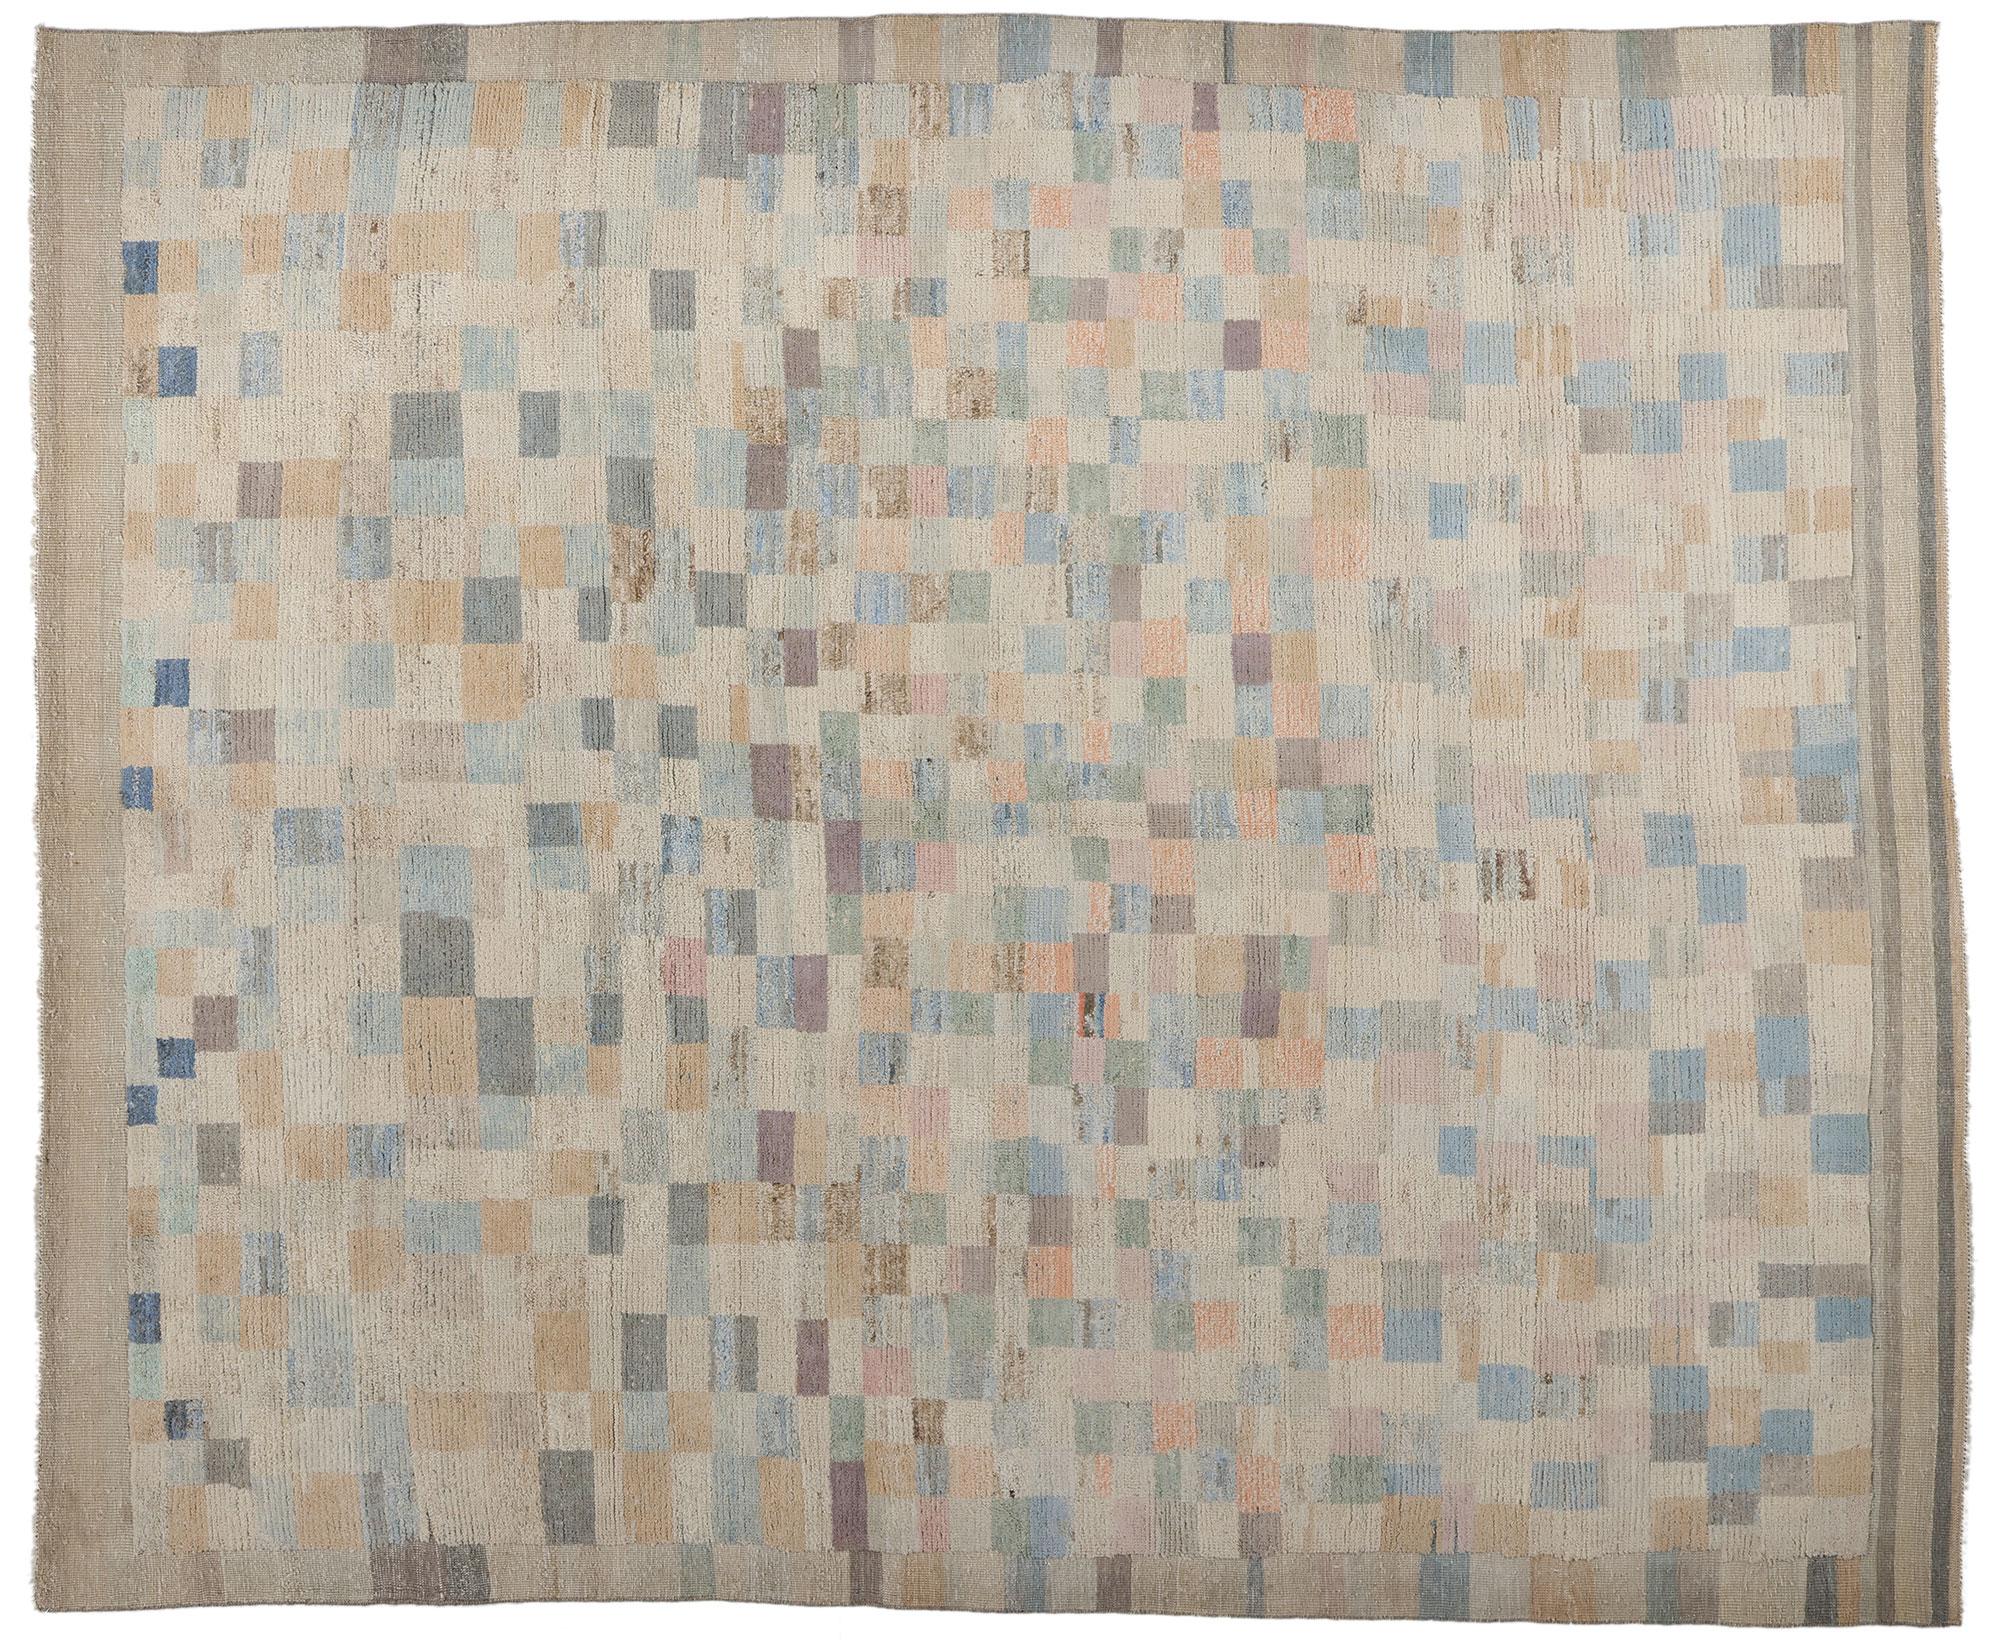 81091 Modern Bauhaus Moroccan Rug, 09'03 x 11'01. Step into a realm where artistic movements collide and cultural heritage takes on a contemporary guise with our exquisite hand-knotted wool Modern Bauhaus Moroccan rug. This stunning piece transcends